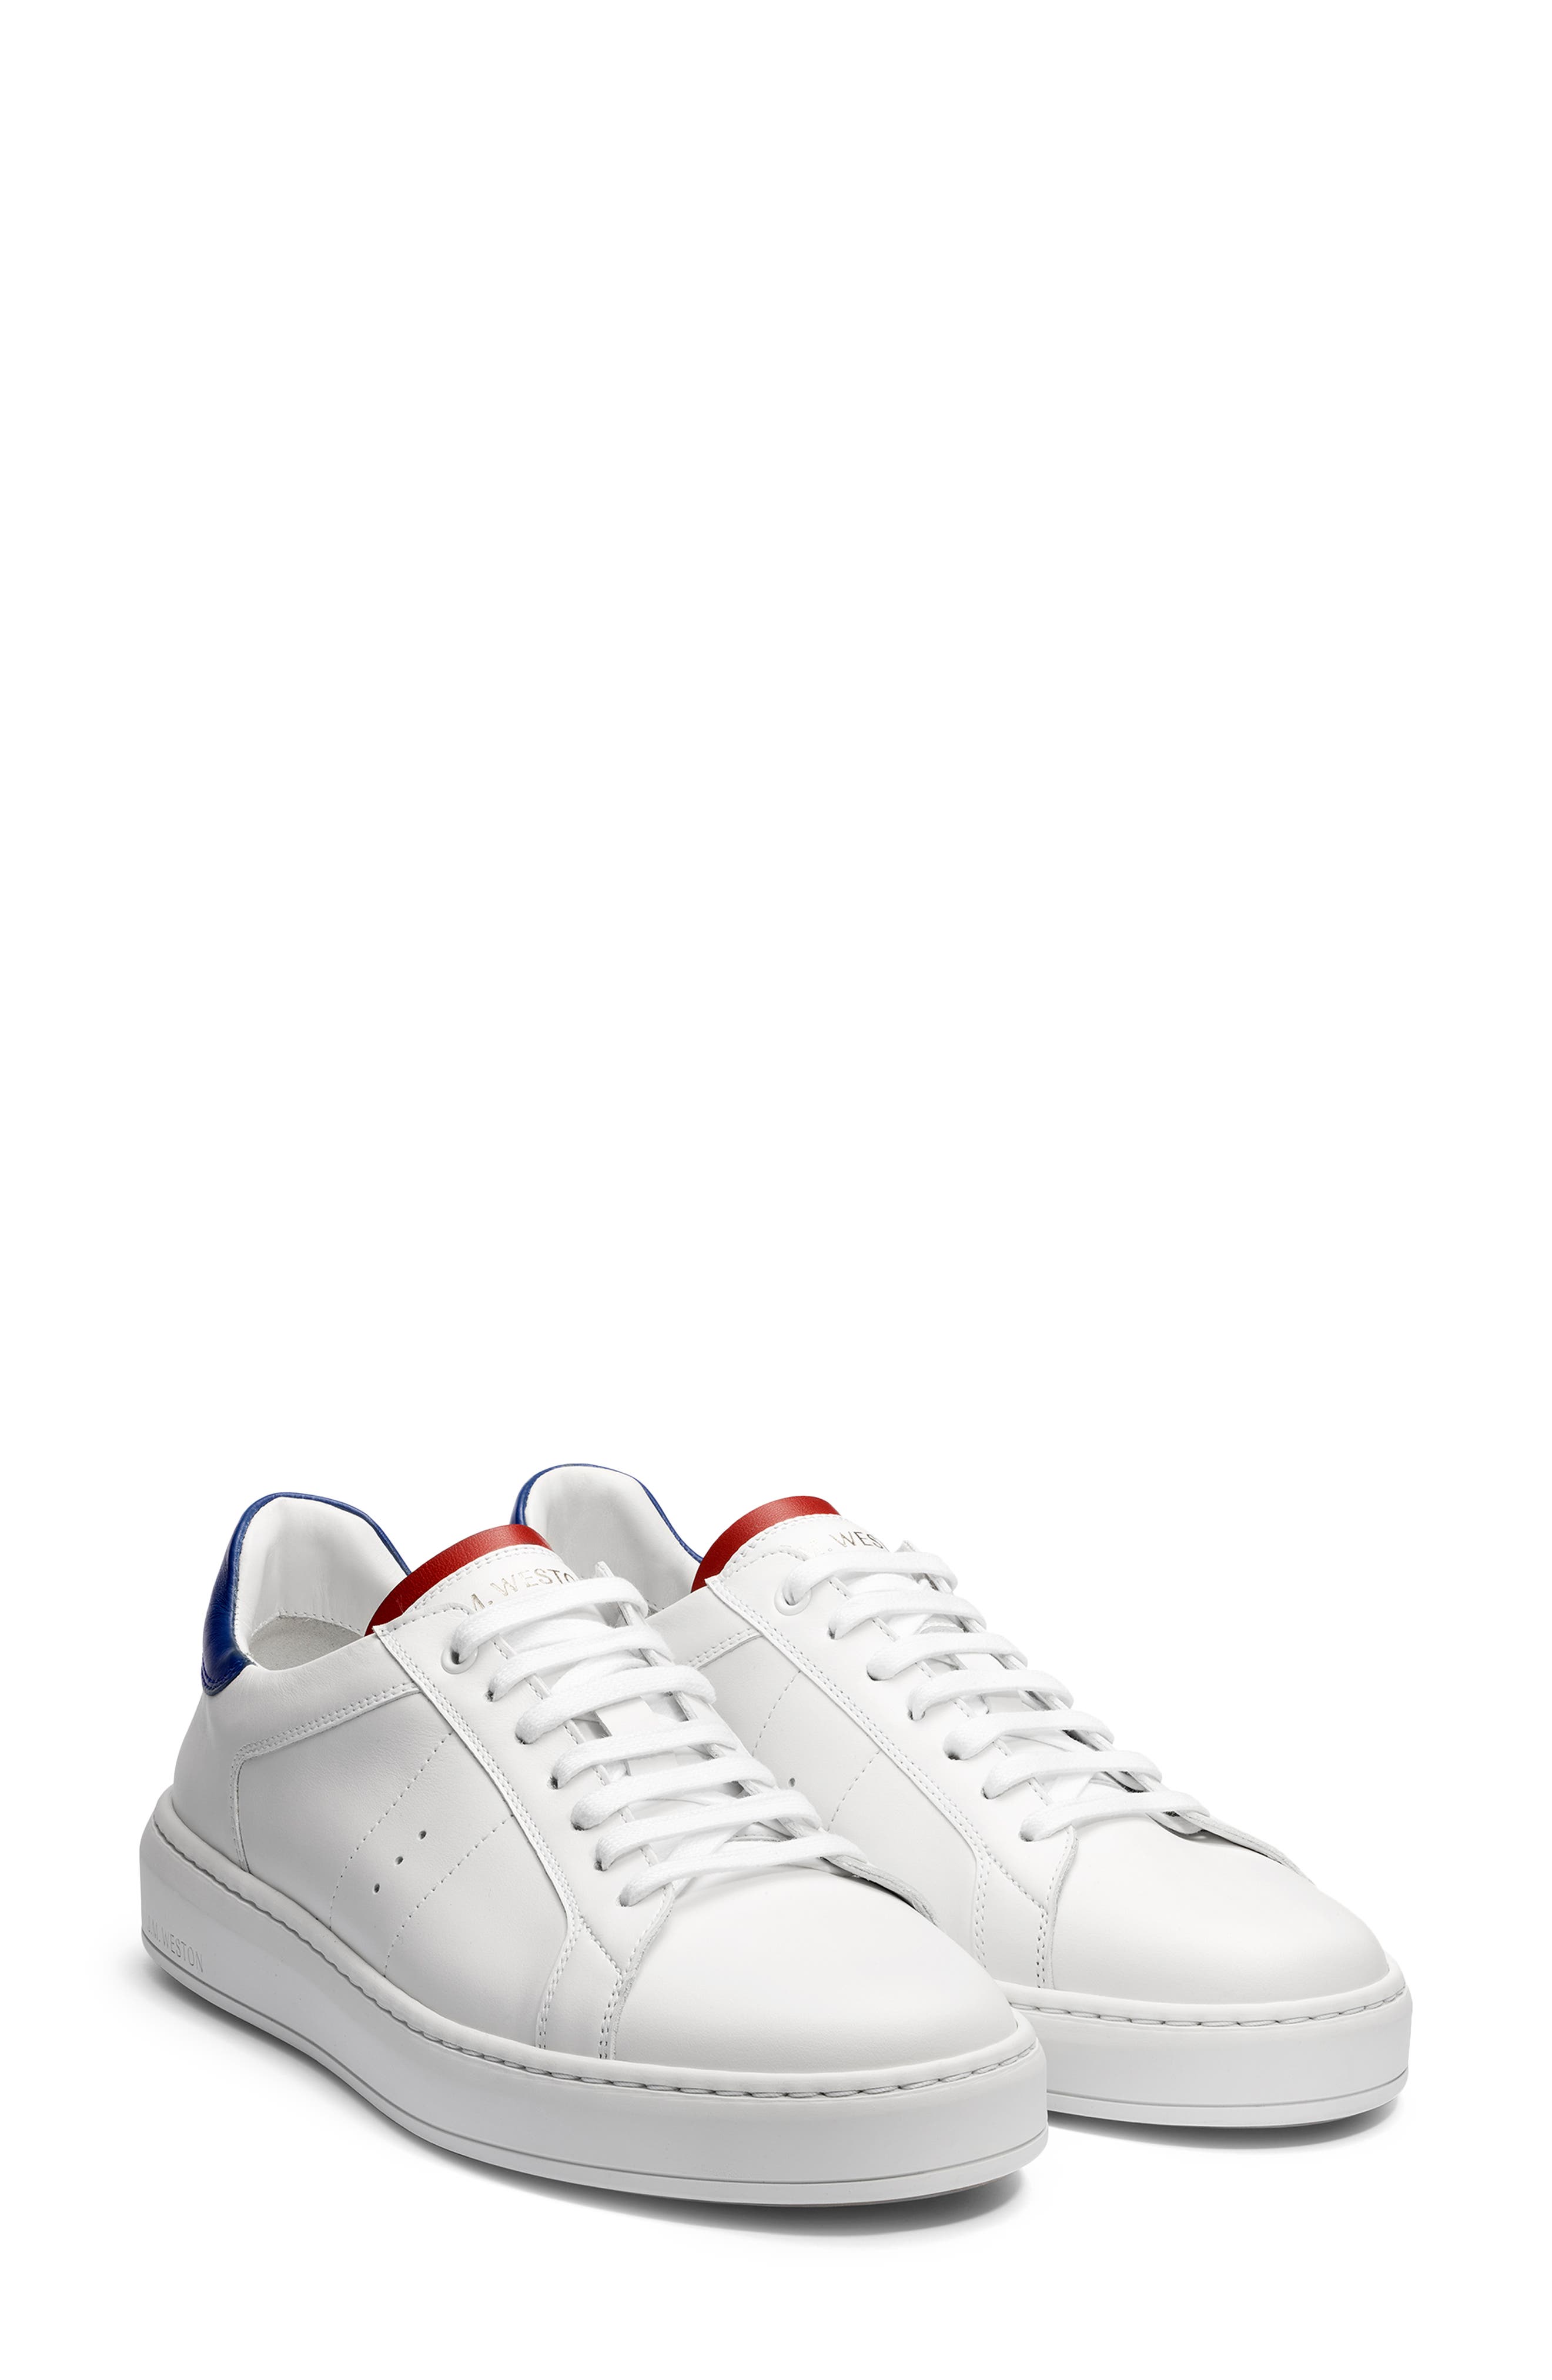 JM WESTON On Time Sneaker in Whte /Red /Blue at Nordstrom